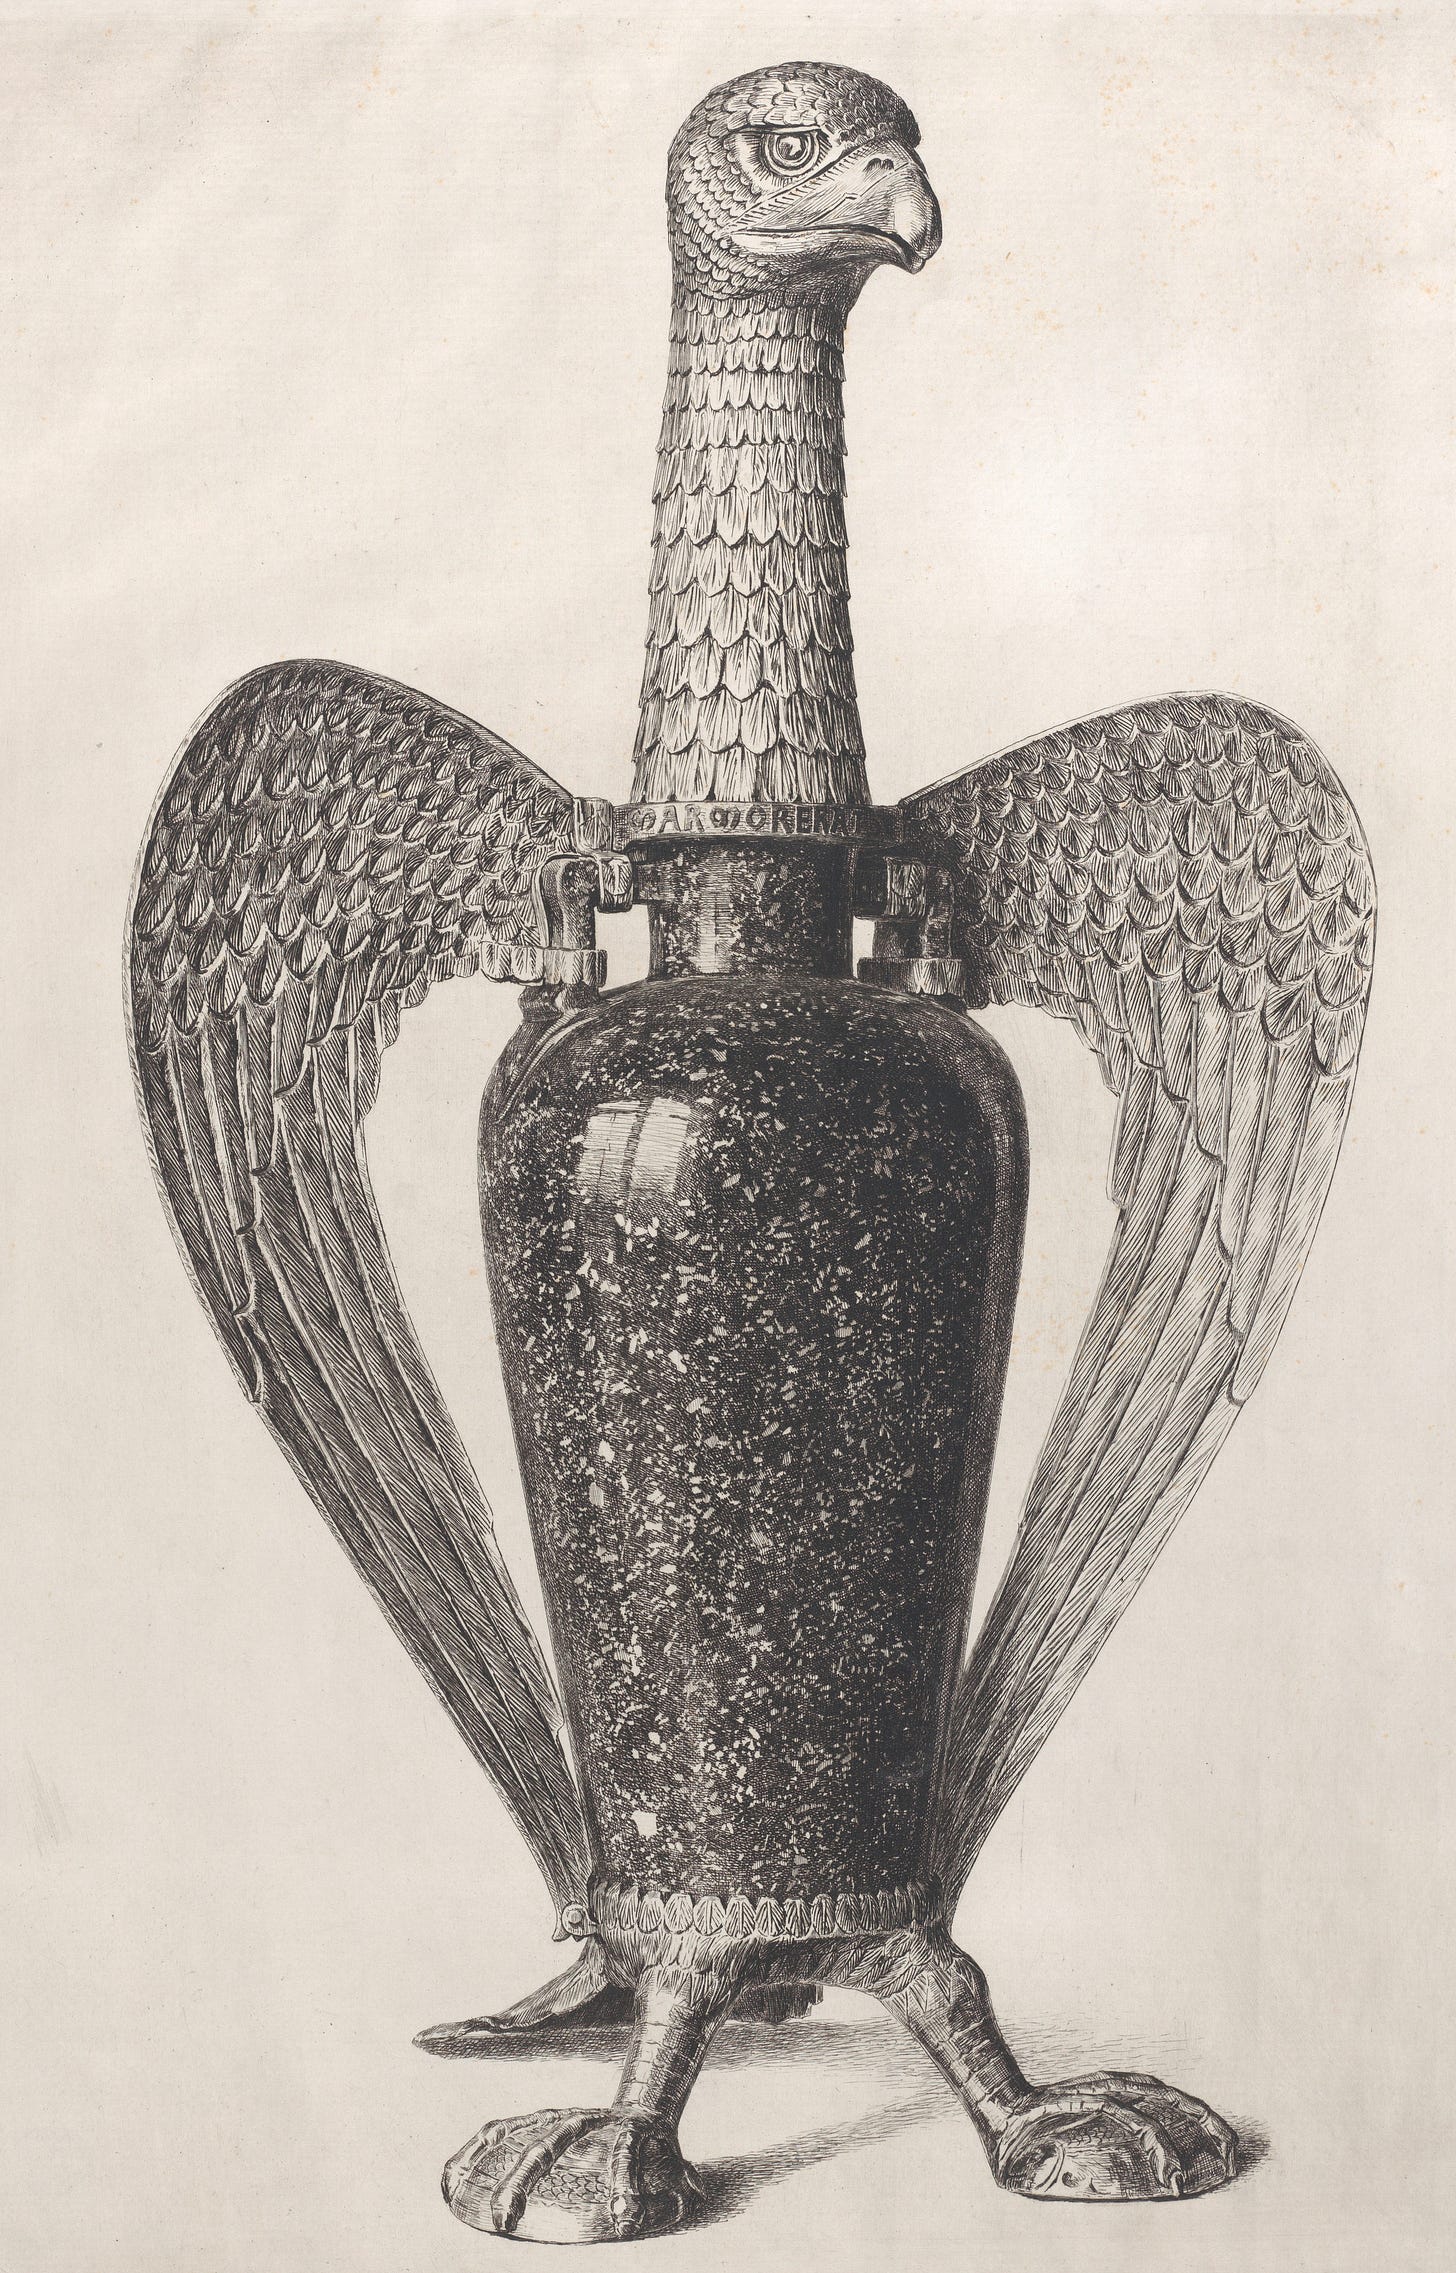 Black and white illustration of a porphyry vase, adorned with eagle head and wings.